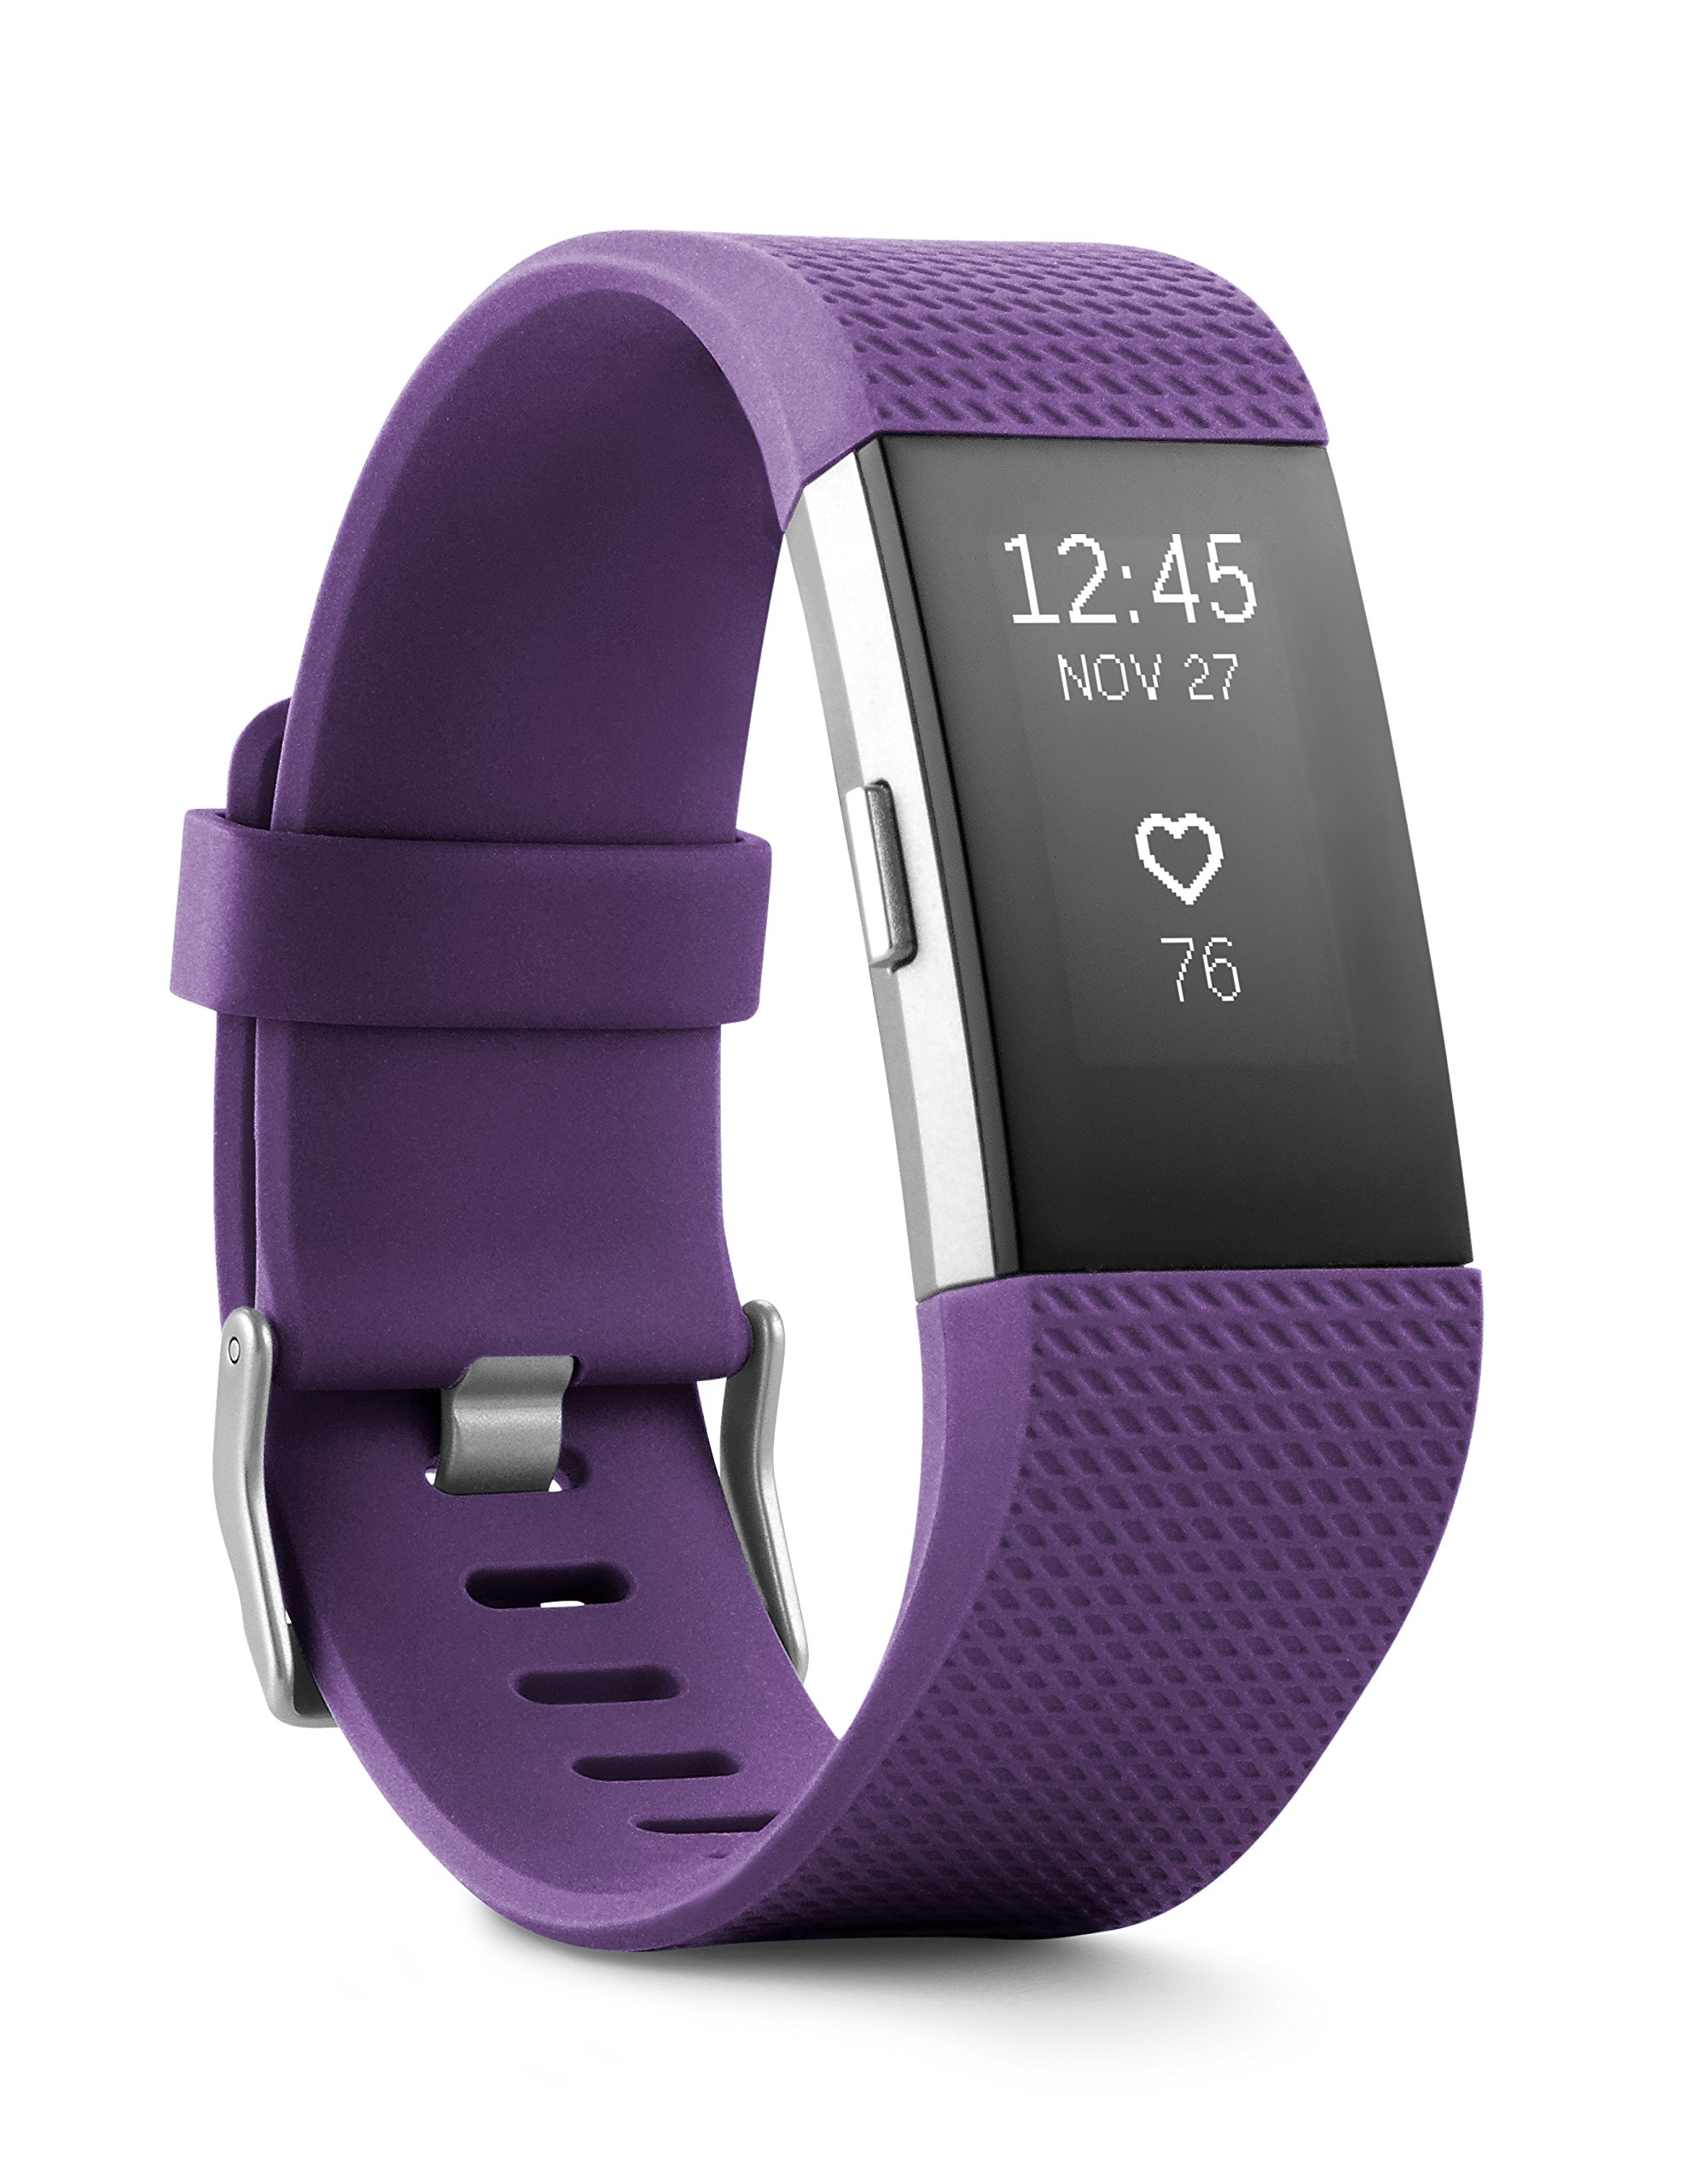 Book Cover Fitbit Charge 2 Heart Rate + Fitness Wristband, Plum, Large (US Version) Plum Large (Pack of 1)